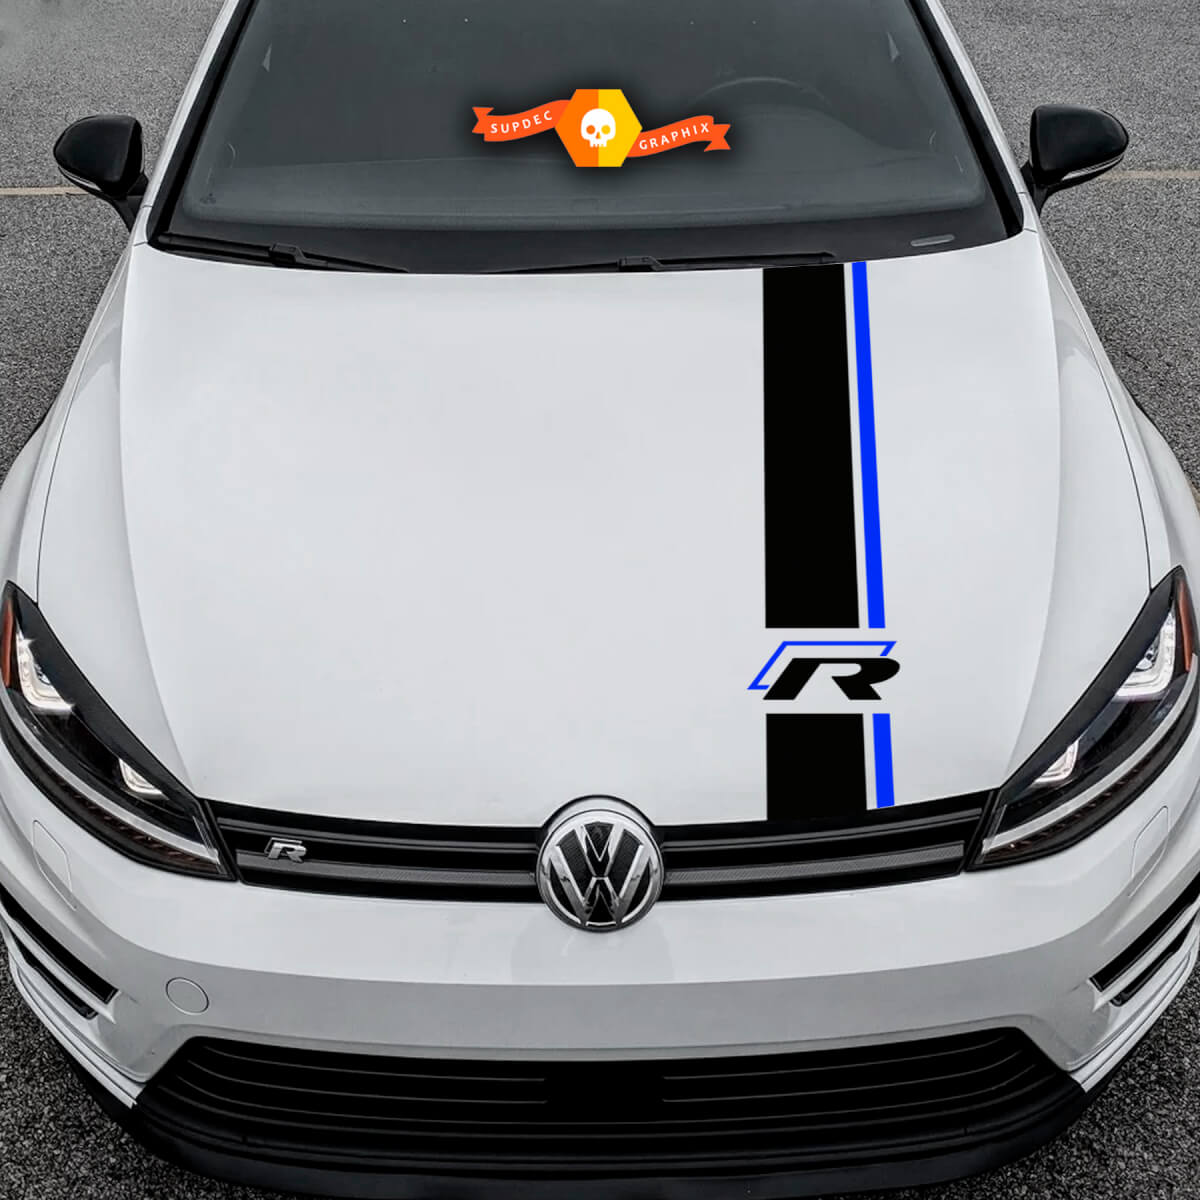 https://de.supdec.com/images/12272_1_hood_strip_any_year_stickers_exclusive_design_decal__for_volkswagen_vw_golf_r_graphics_2_colors.jpg